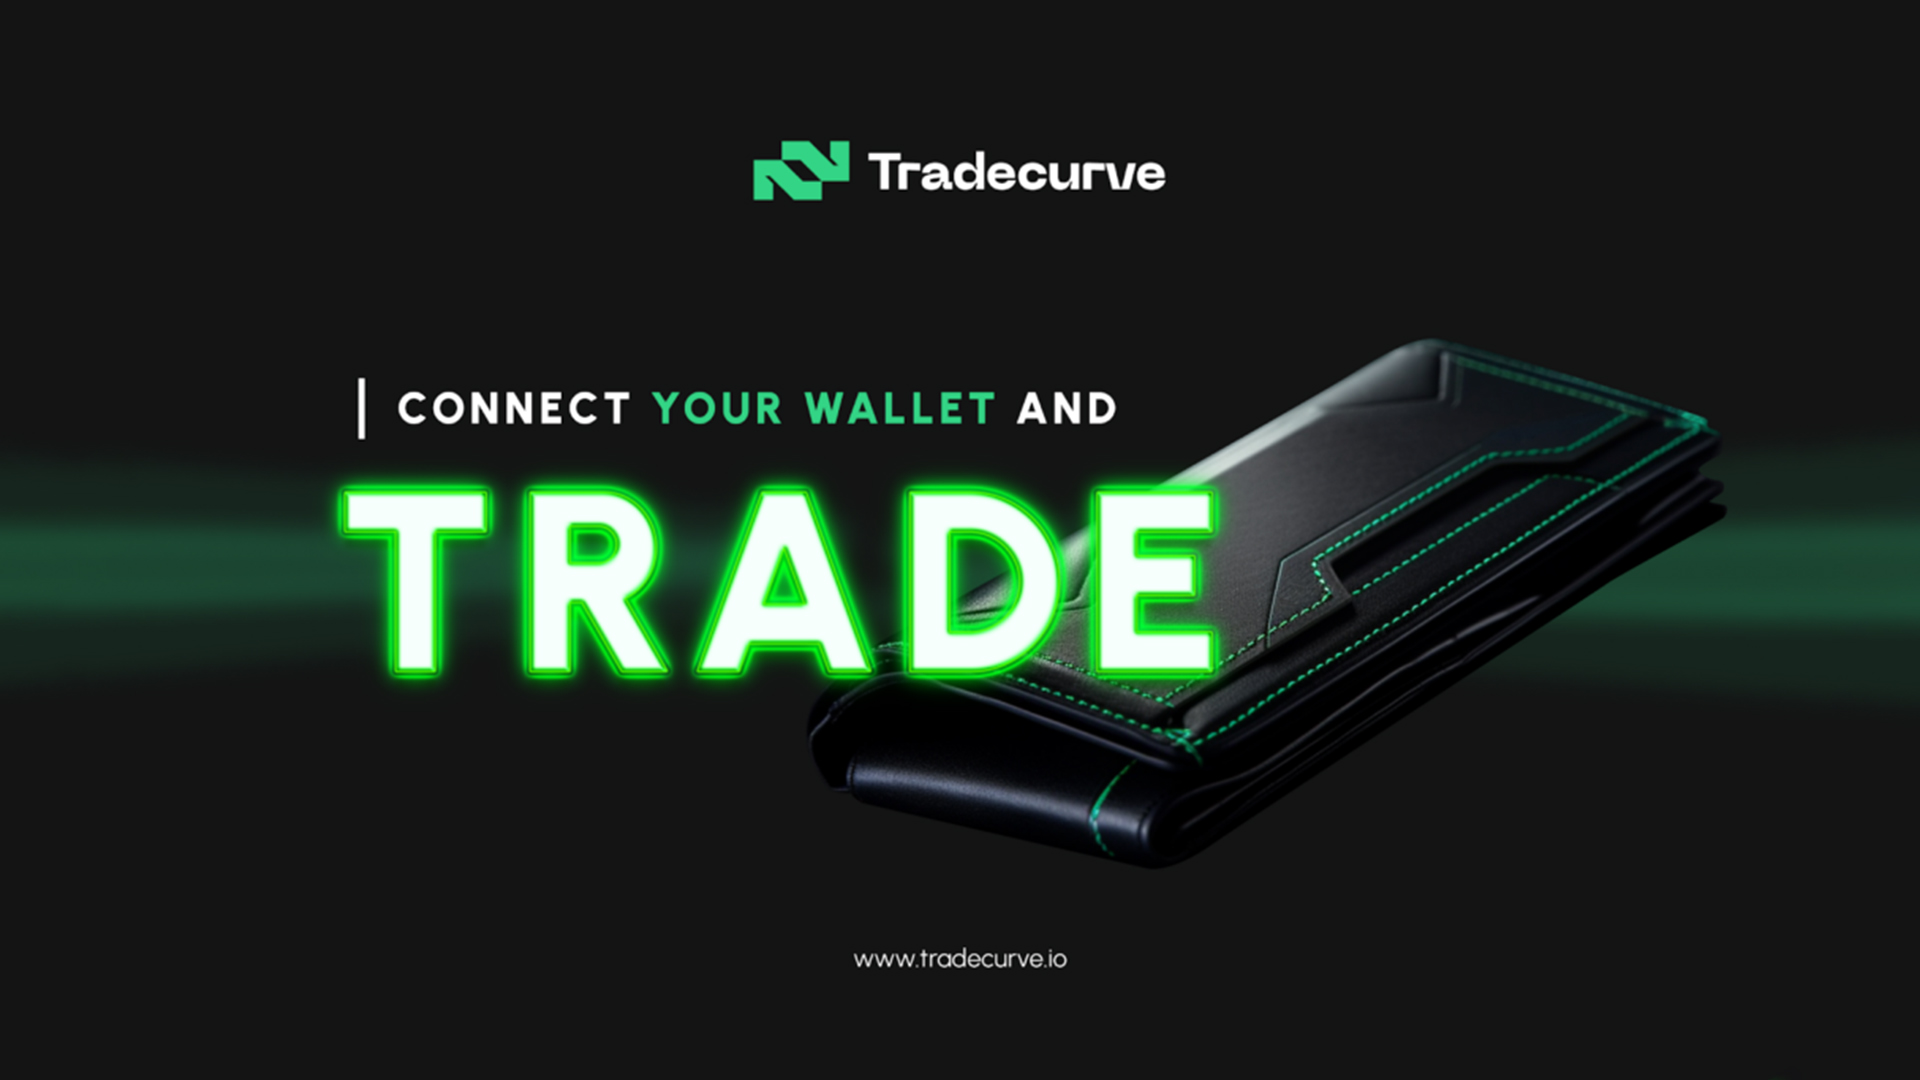 Will Tradecurve Take Over Fantom And Enjin Coin?